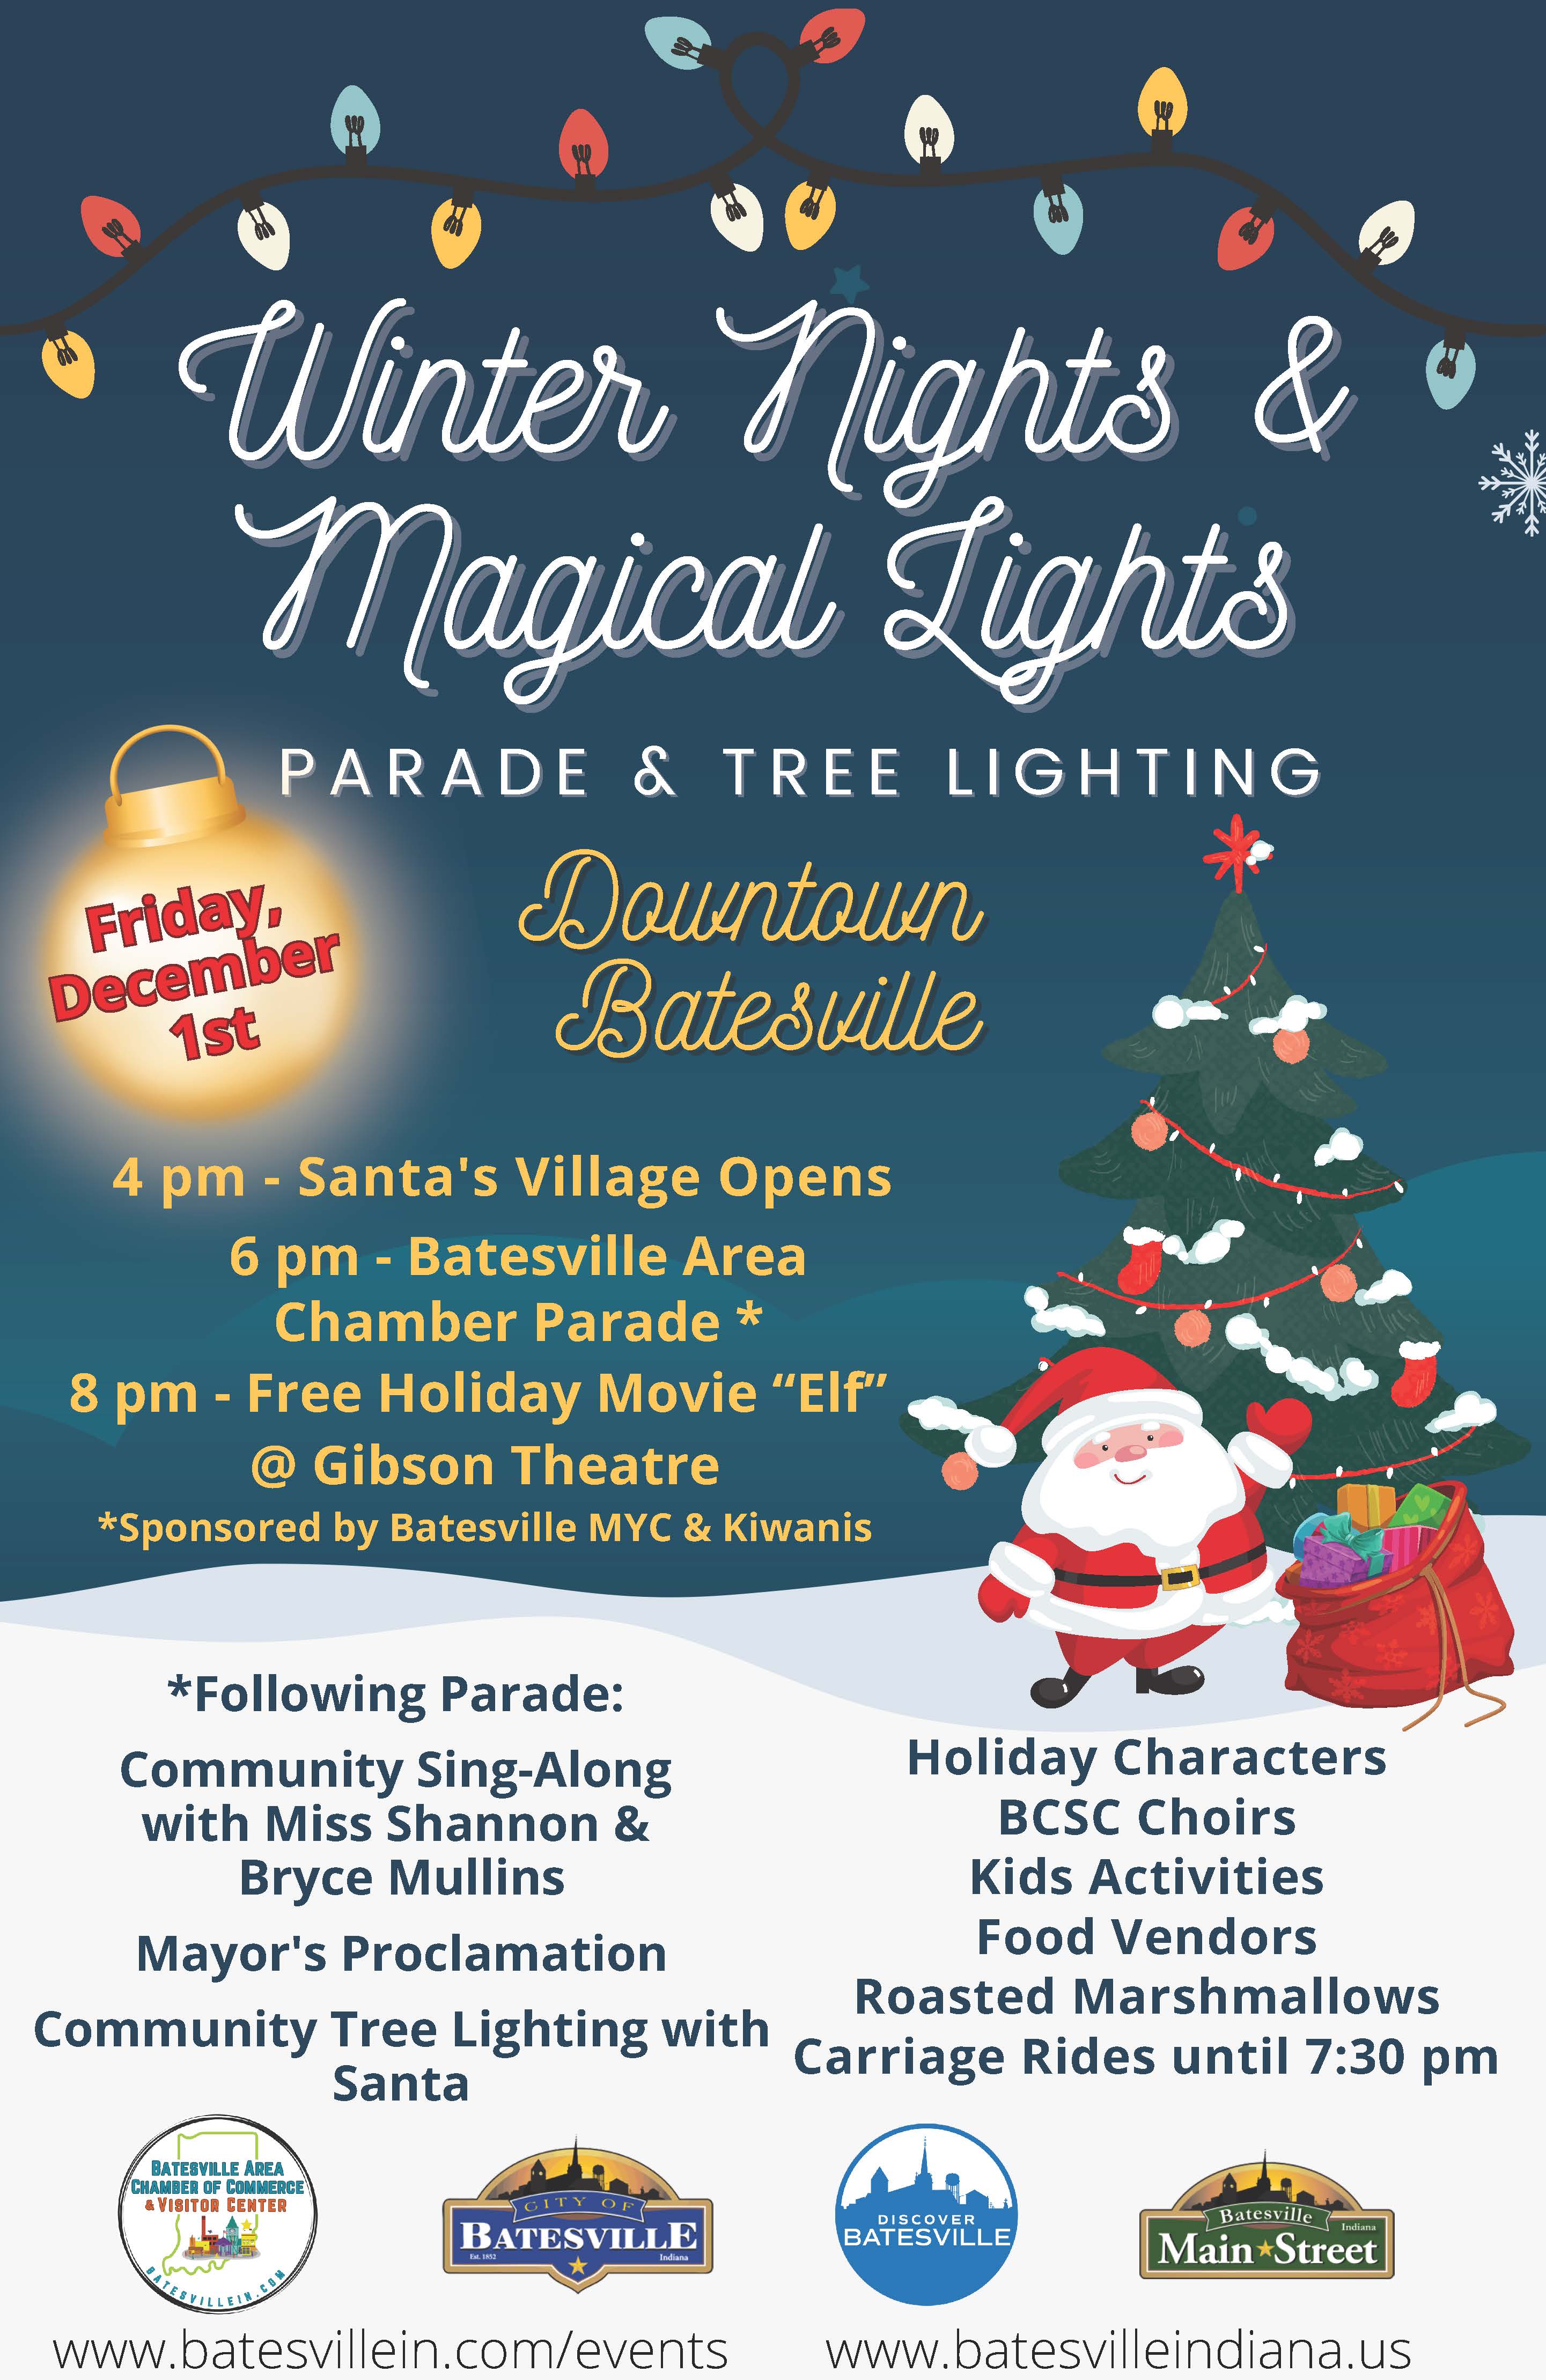 Batesville gearing up for “Winter Nights and Magical Lights” – WRBI Radio